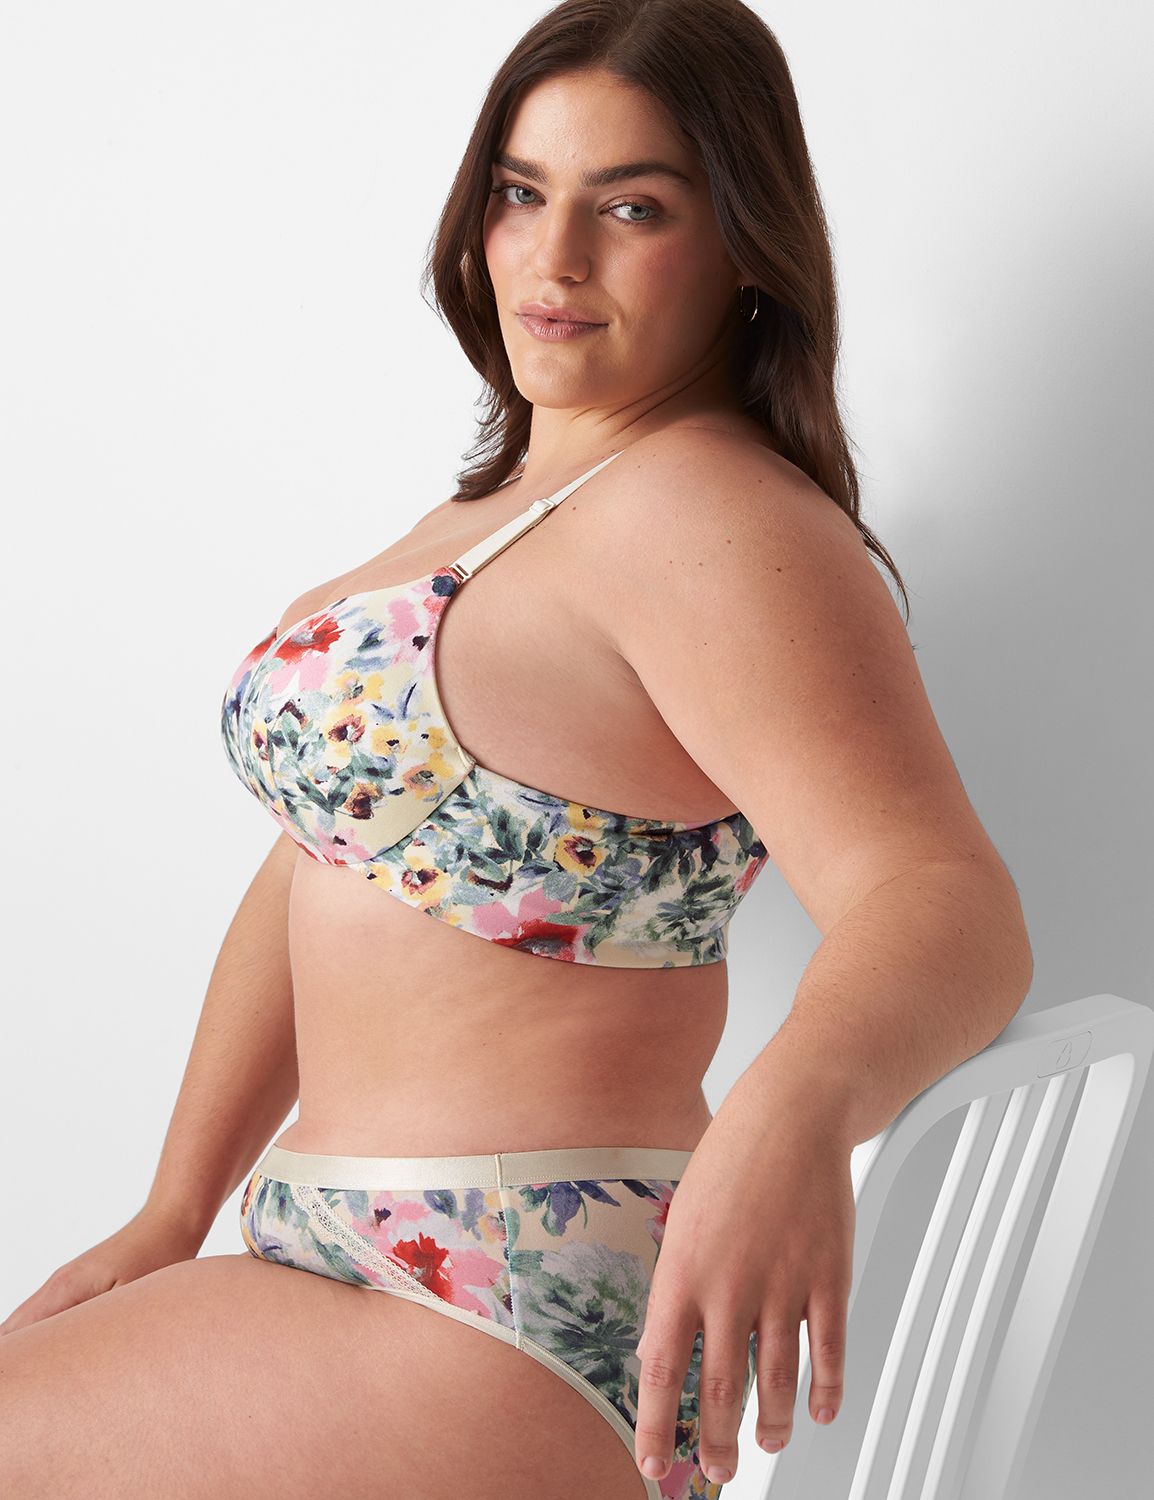 CACIQUE BY LANE BRYANT LIGHTLY LINED FRENCH BALCONETTE BRA MAUVE 40DD  PRETTY ! - 3D Kitchen Software